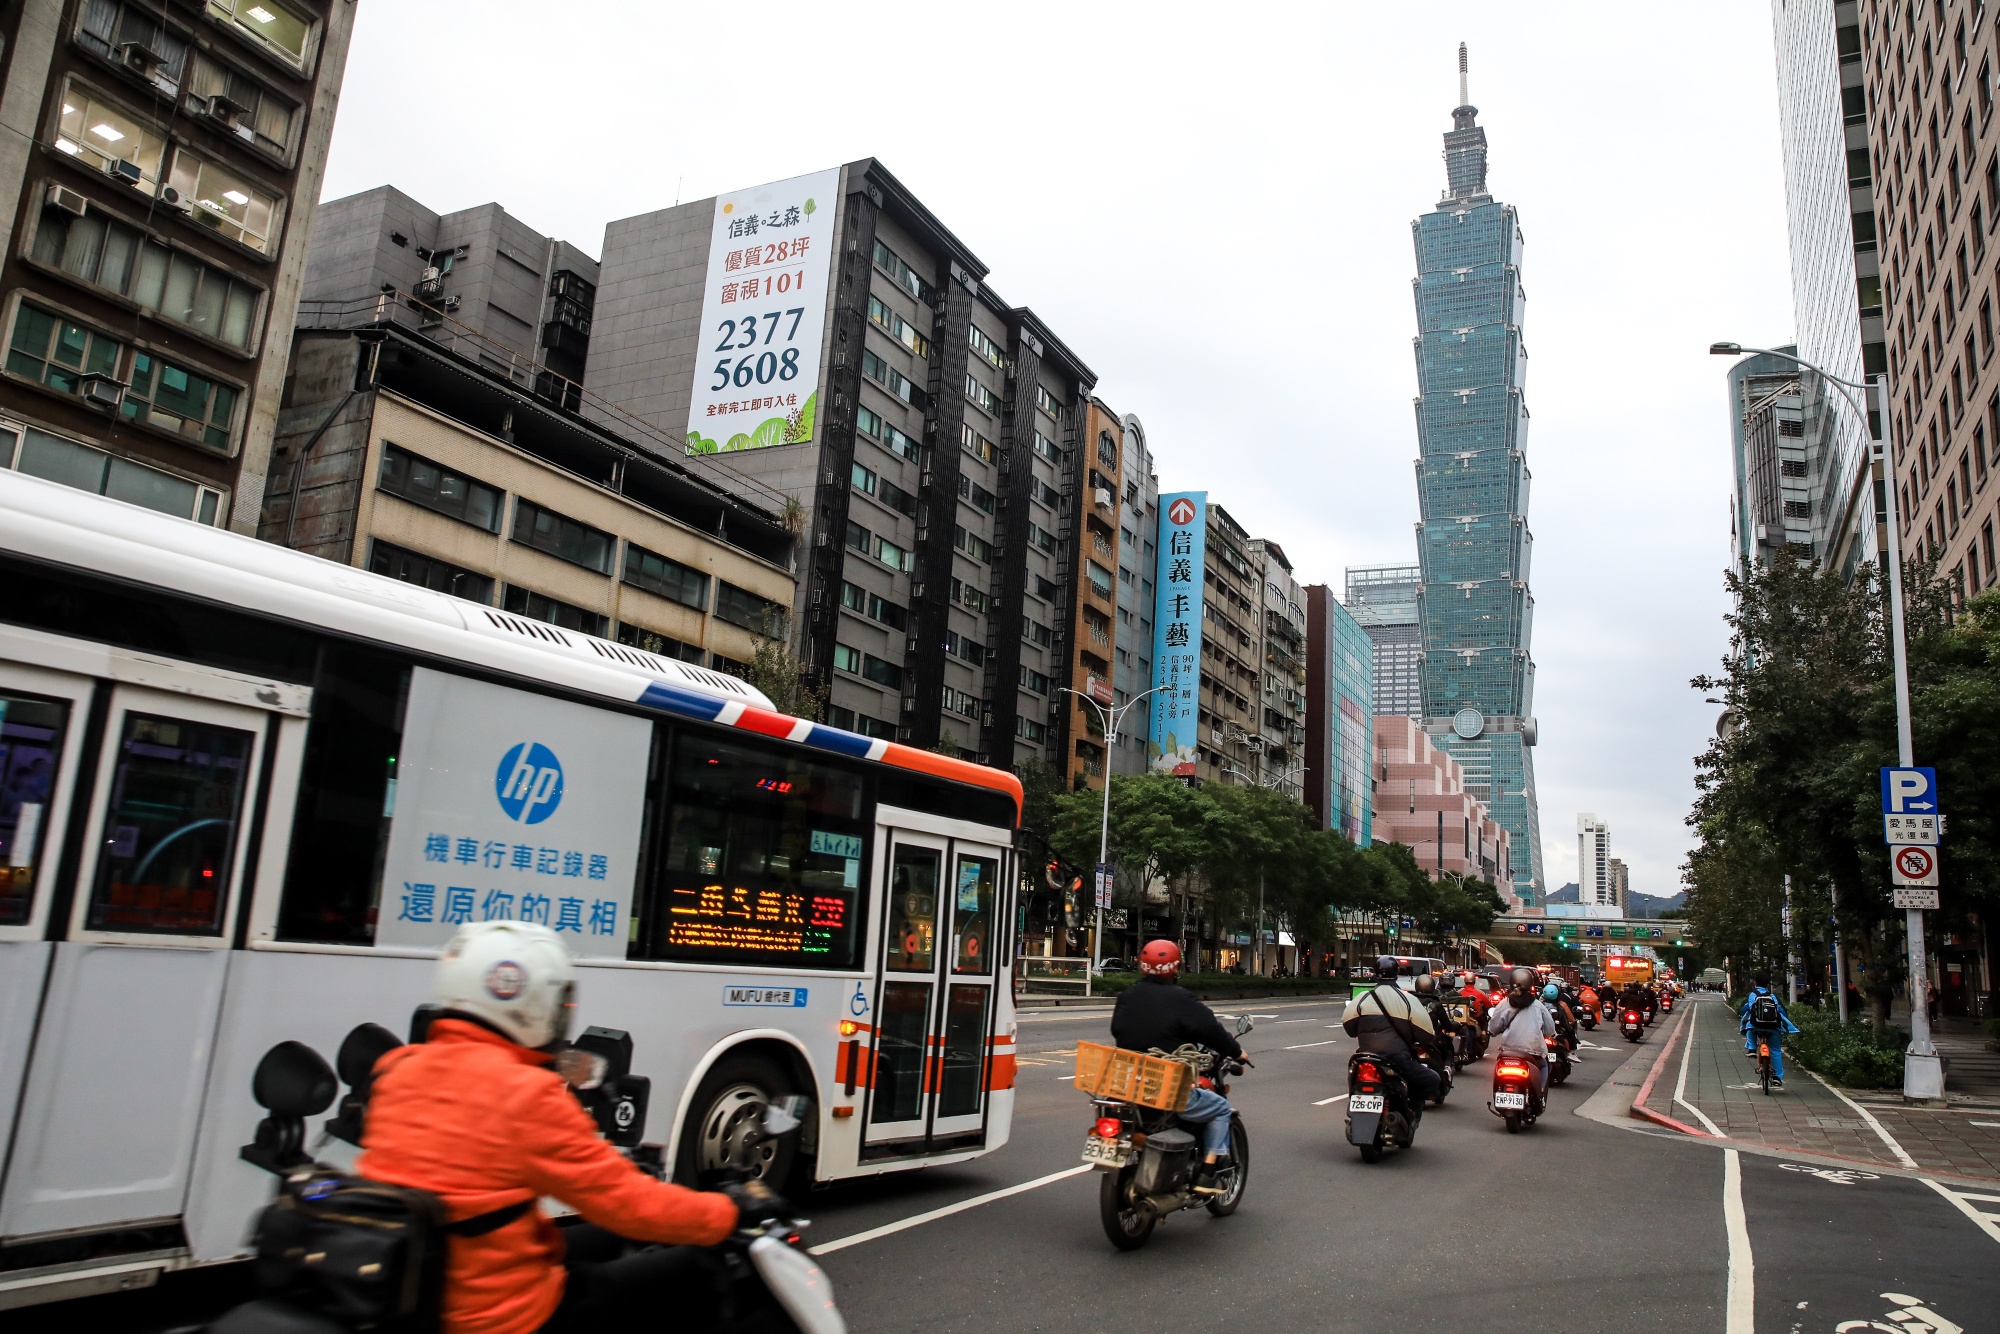 Taiwan's Economy Falls Into Recession as Global Demand Dries Up - Bloomberg